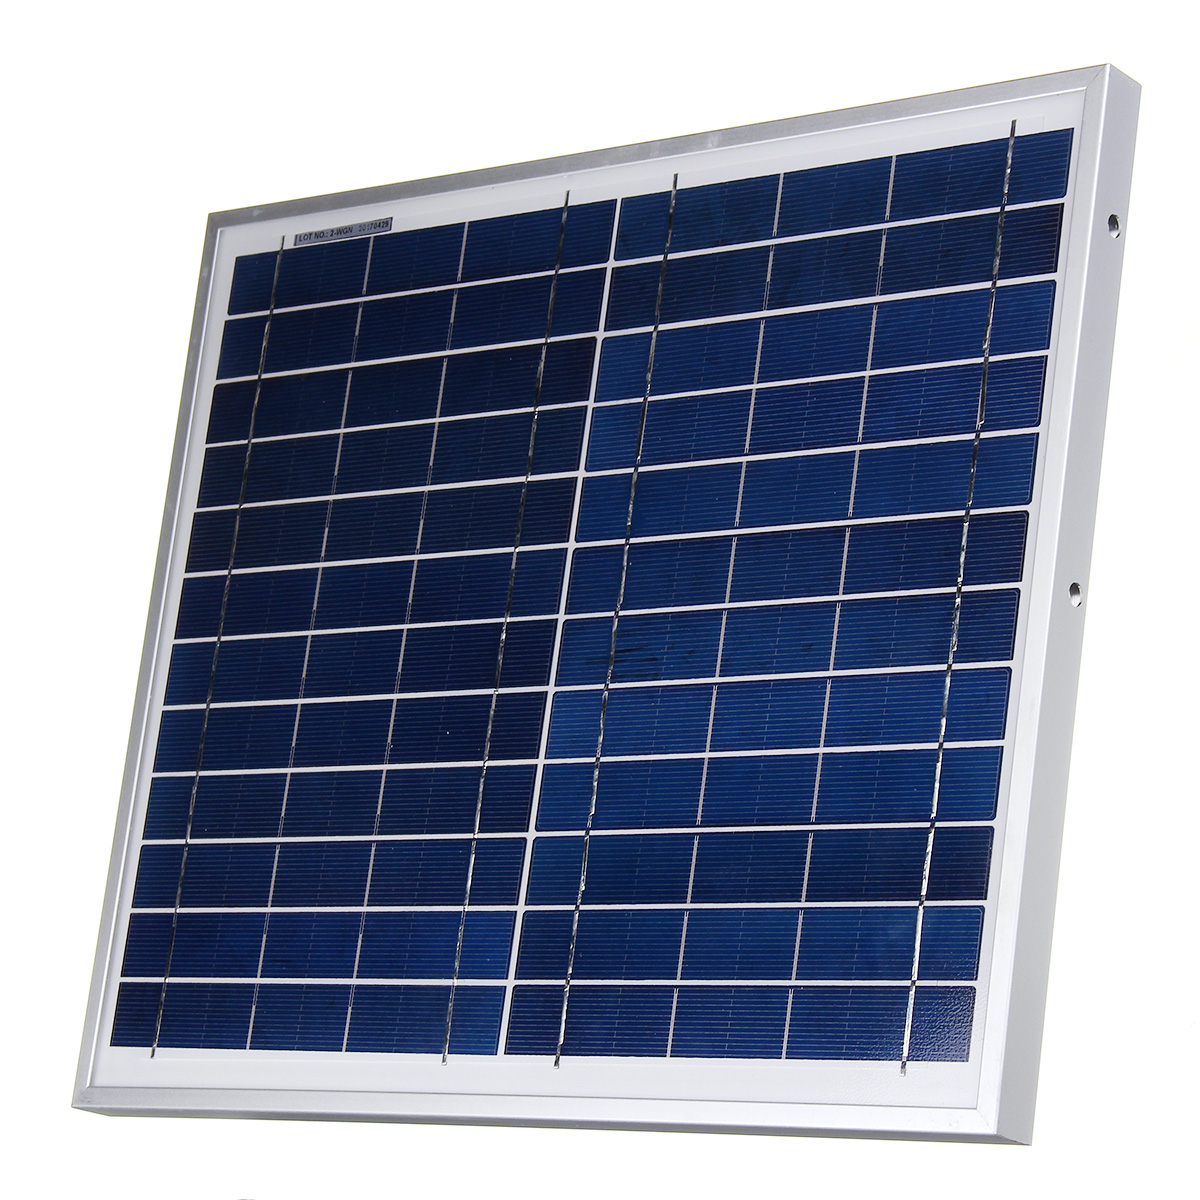 

12V 12W Polysilicon Solar Panel Battery Charger System Module Marine Boat RV Waterproof